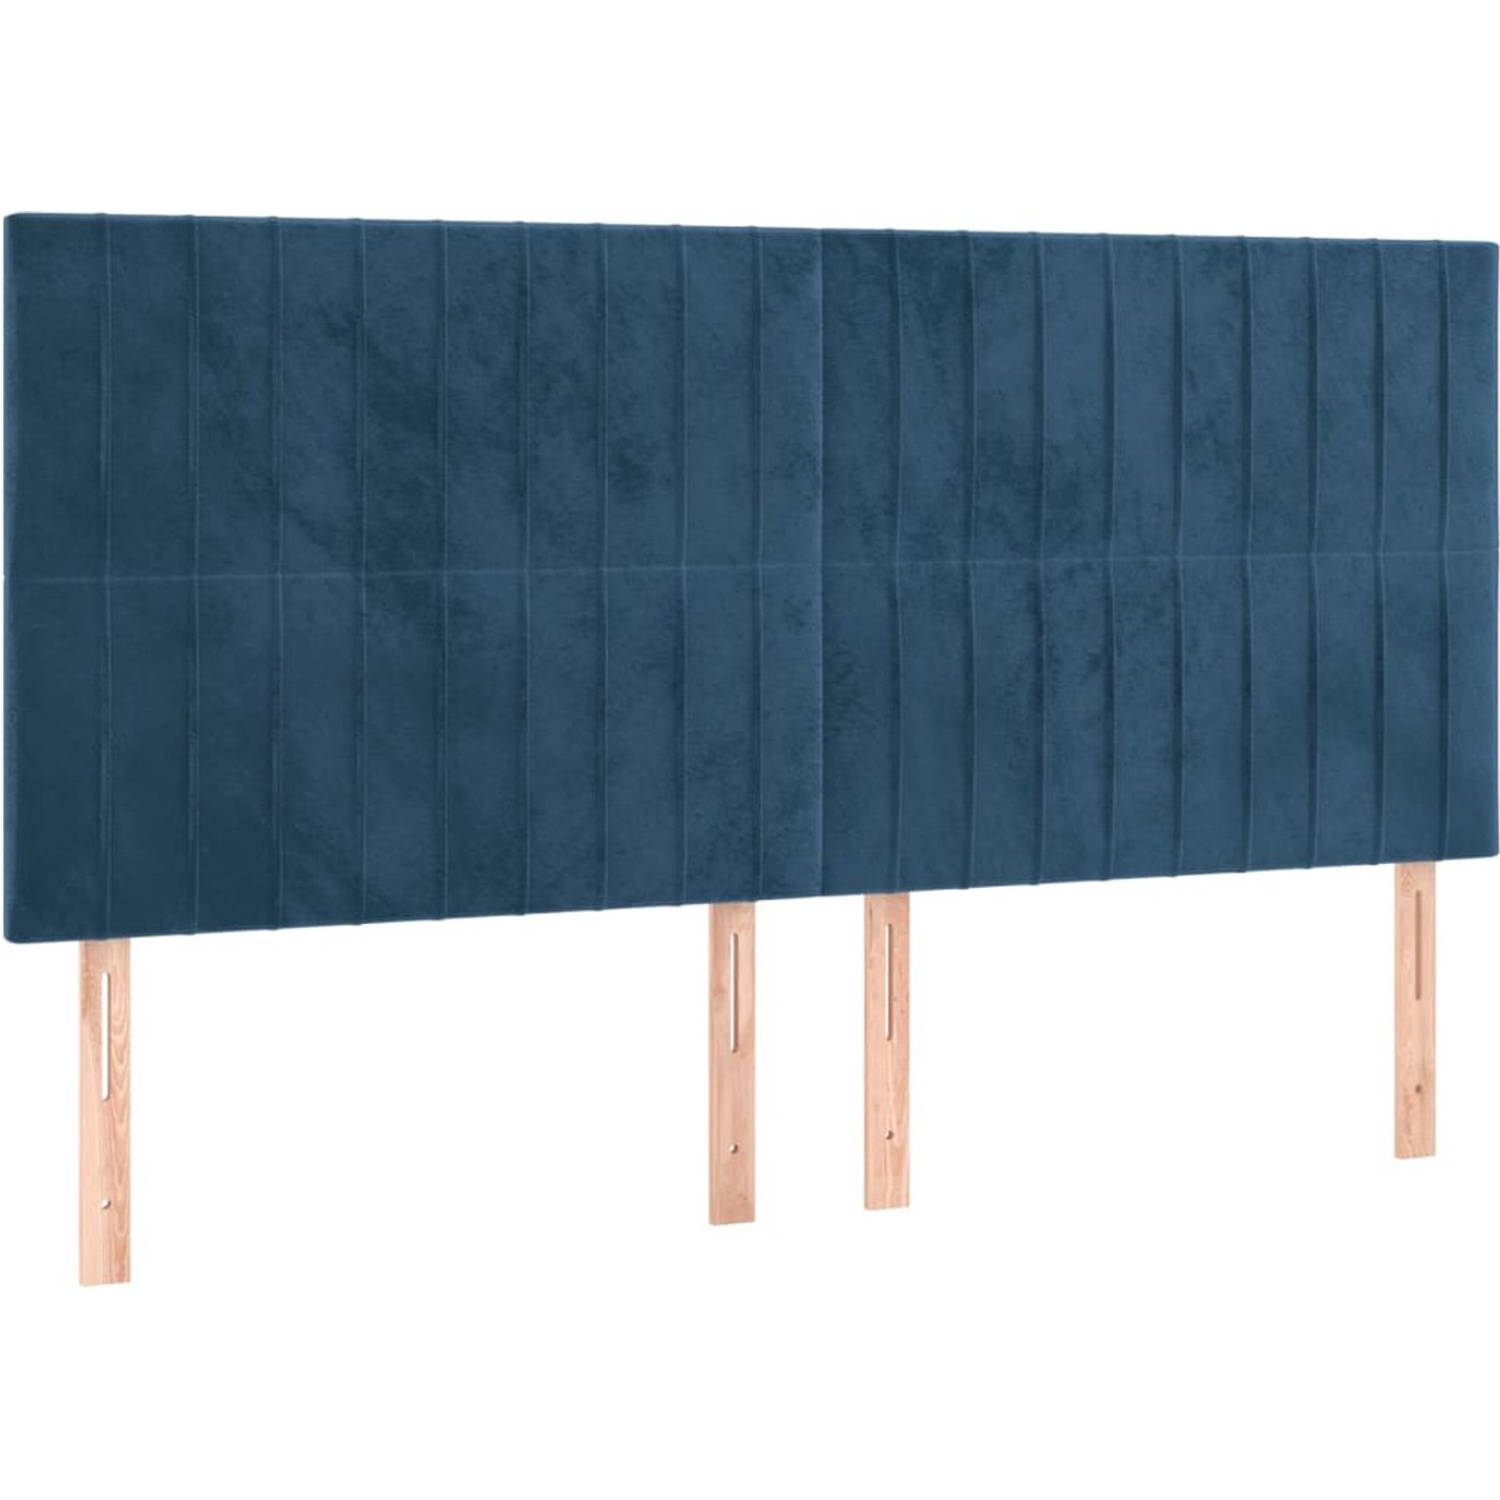 The Living Store Bed Donkerblauw - Boxspringbed - 203x160x118/128 cm - Fluweel